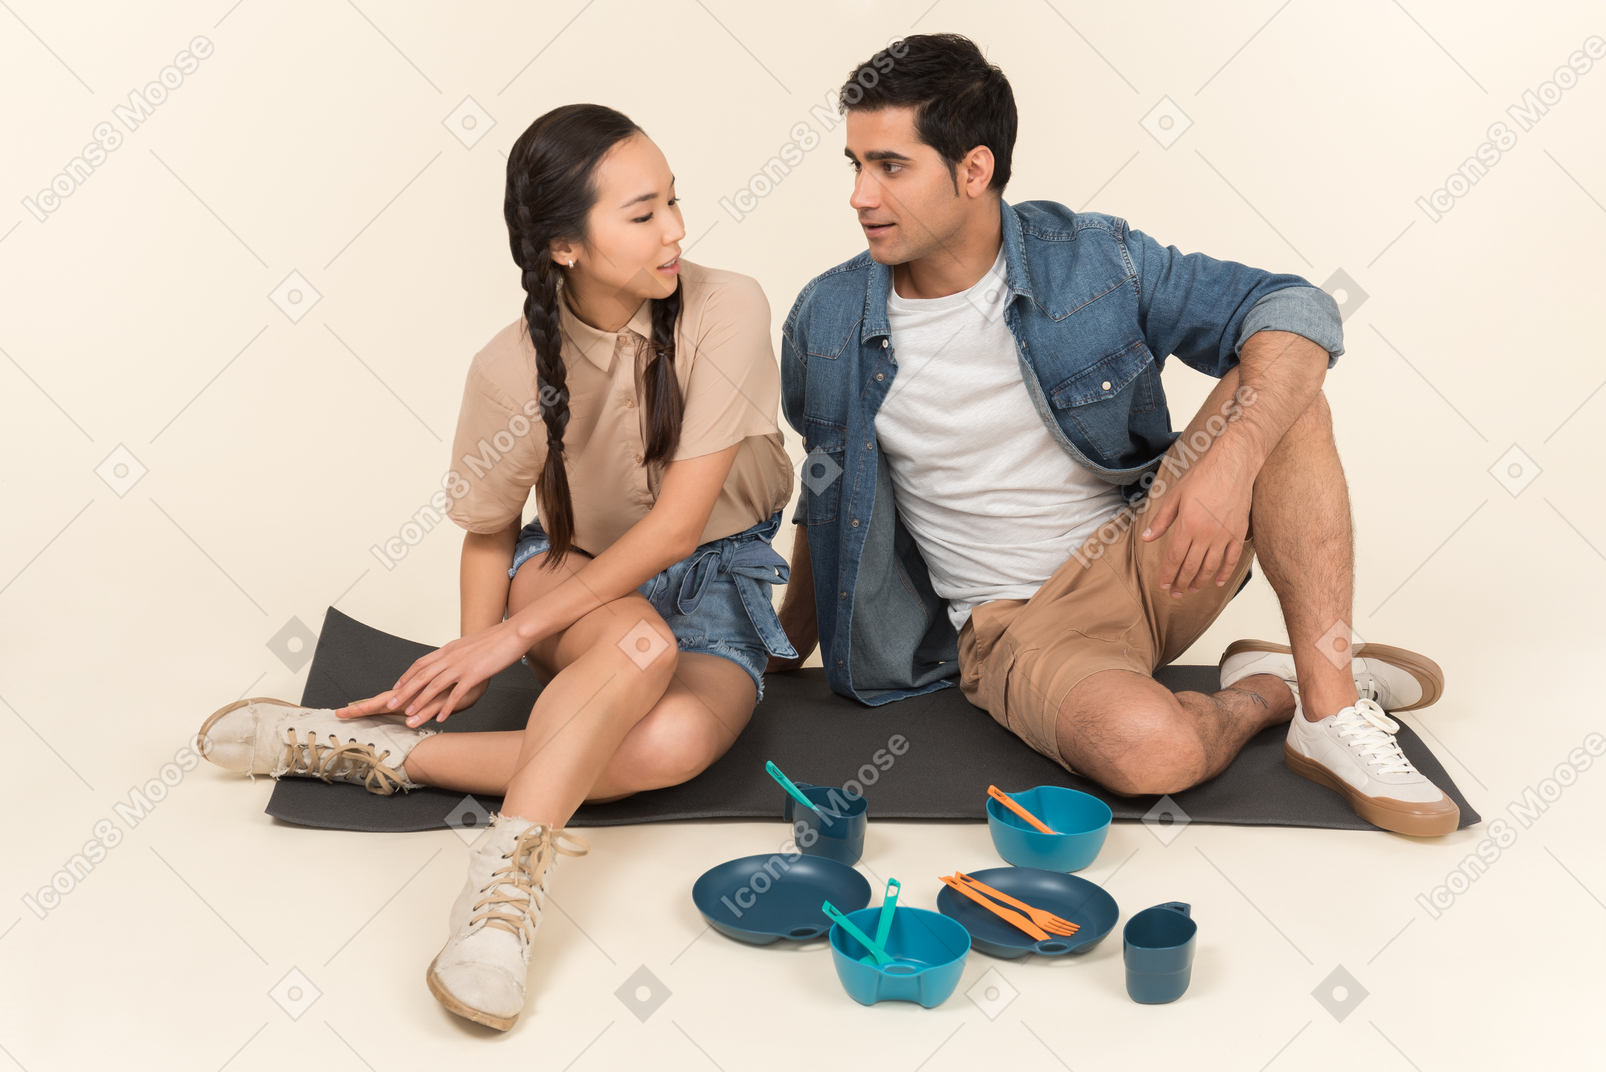 Interracial couple sitting on karimat near dishes